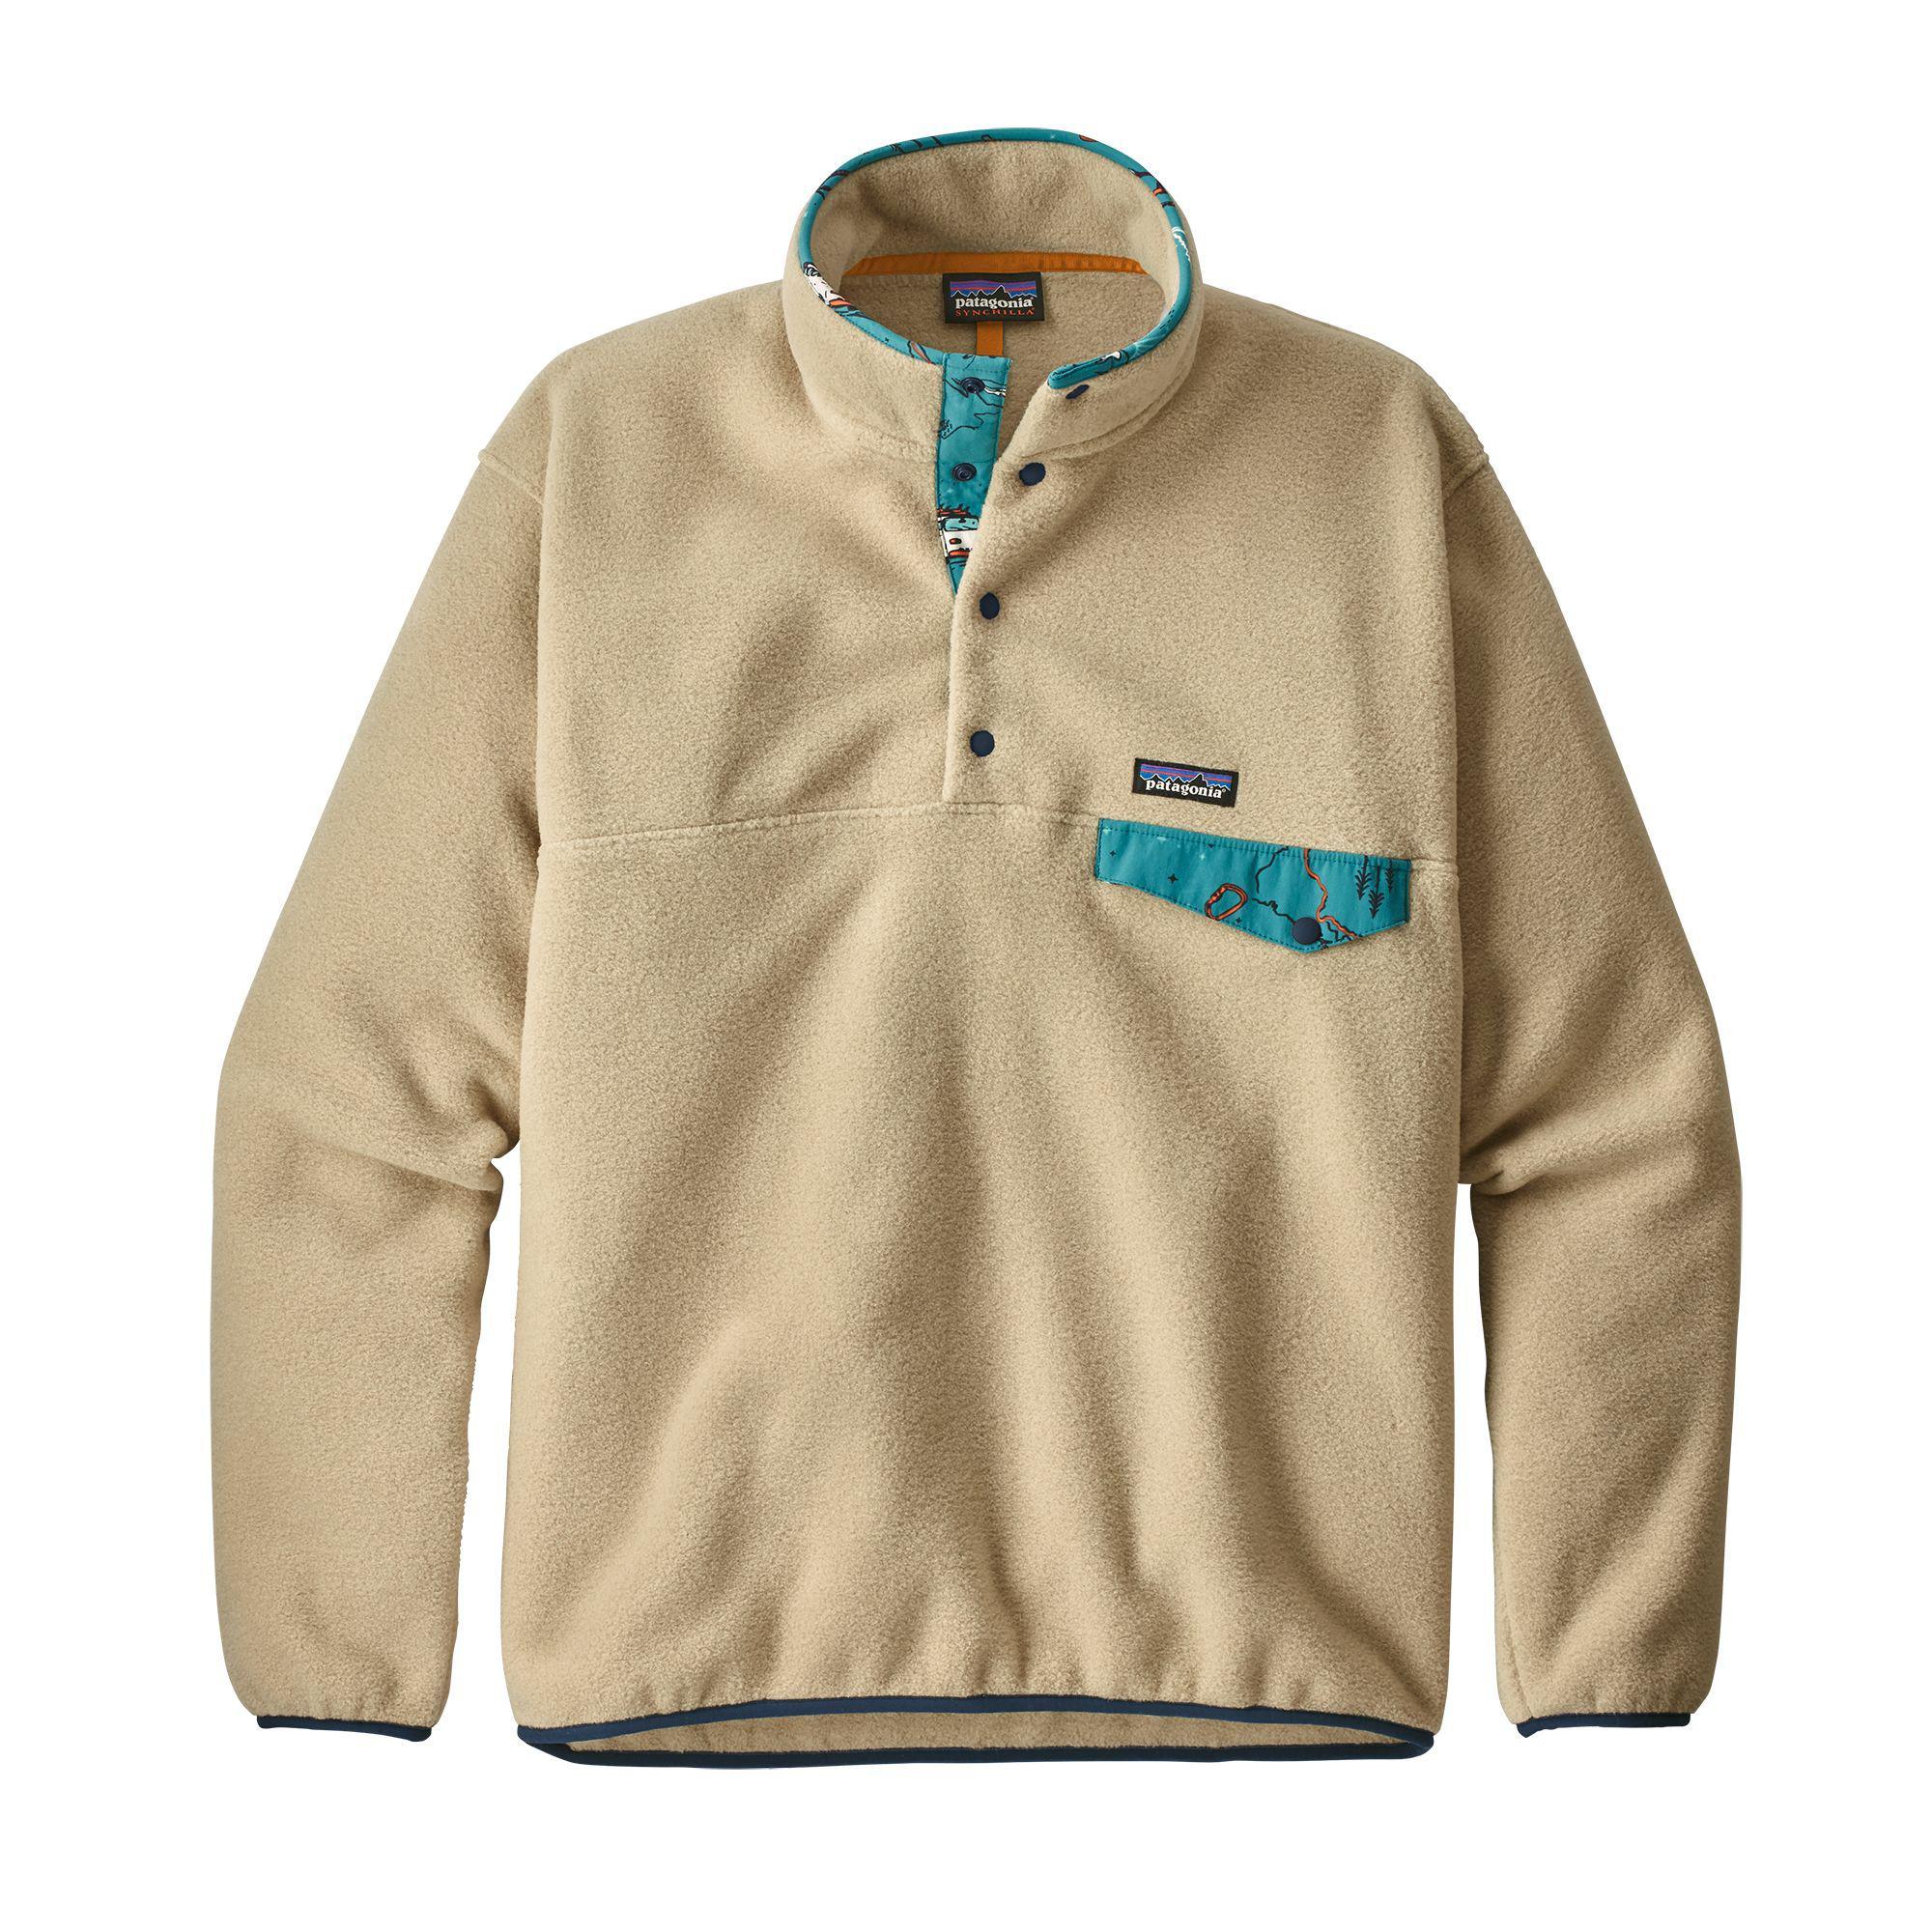 Lyst - Patagonia Lightweight Synchilla® Snap-t® Fleece Pullover for Men